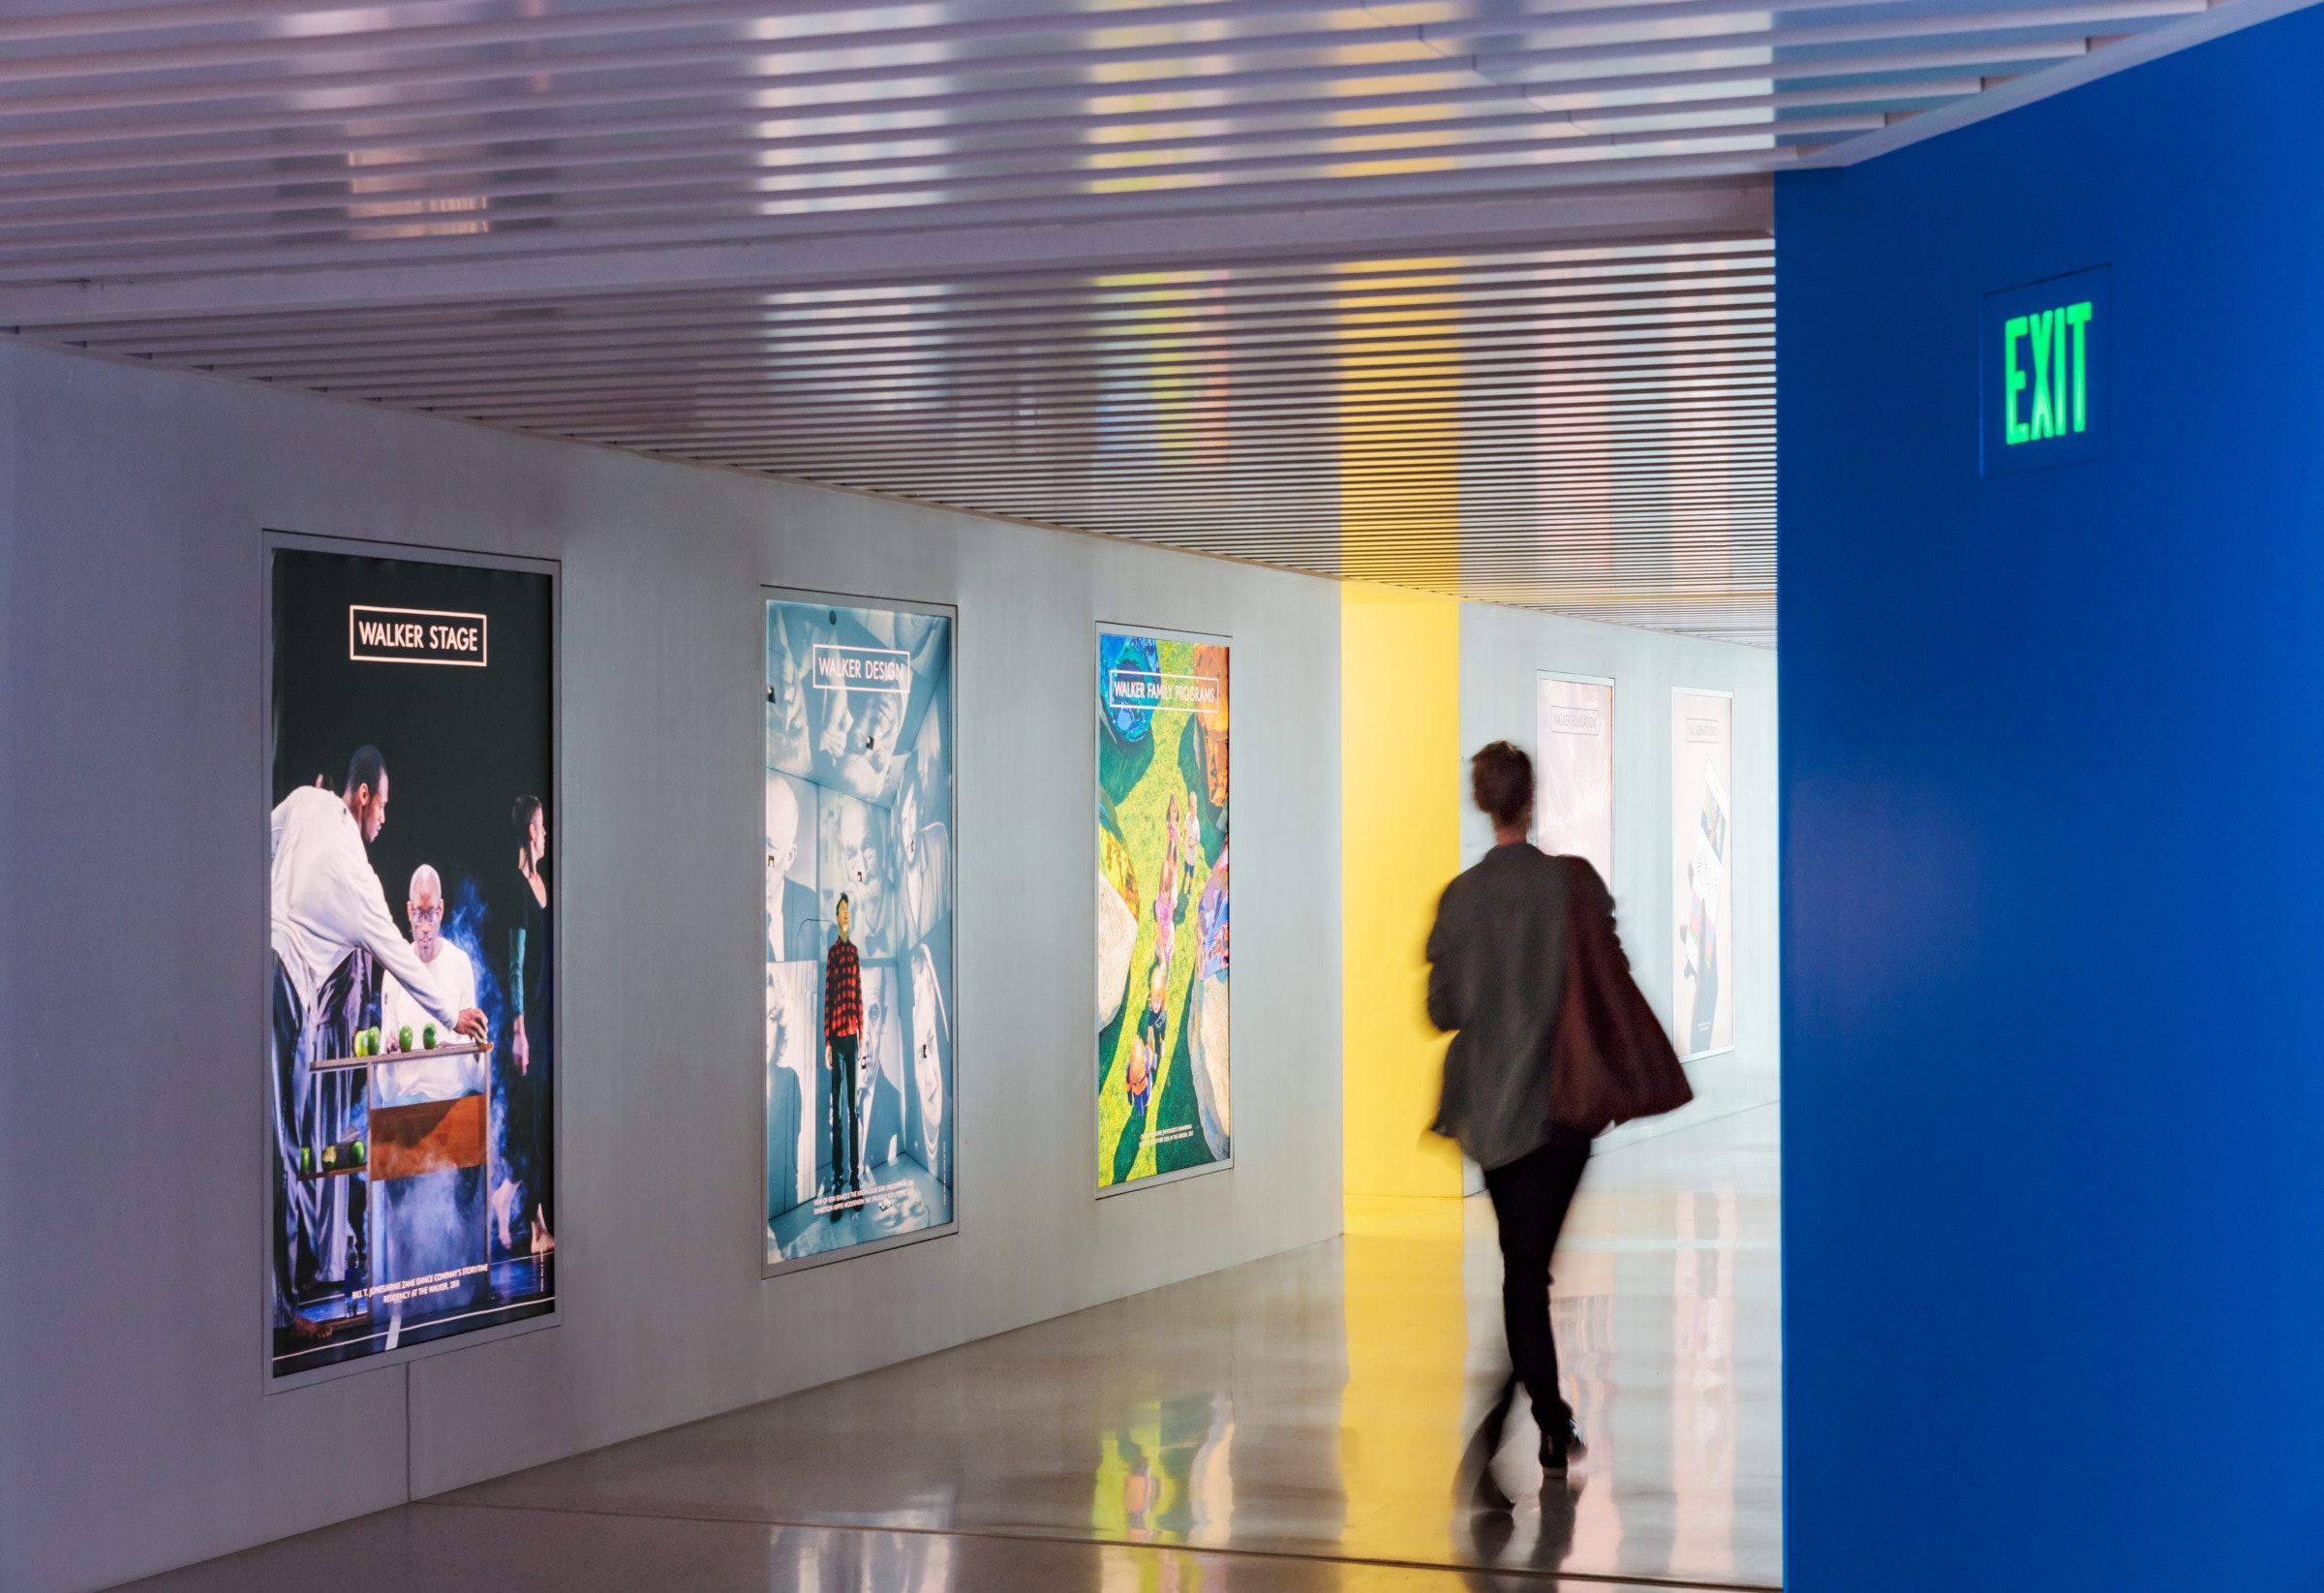 A woman walks down a hallway with posters advertising museum programming.